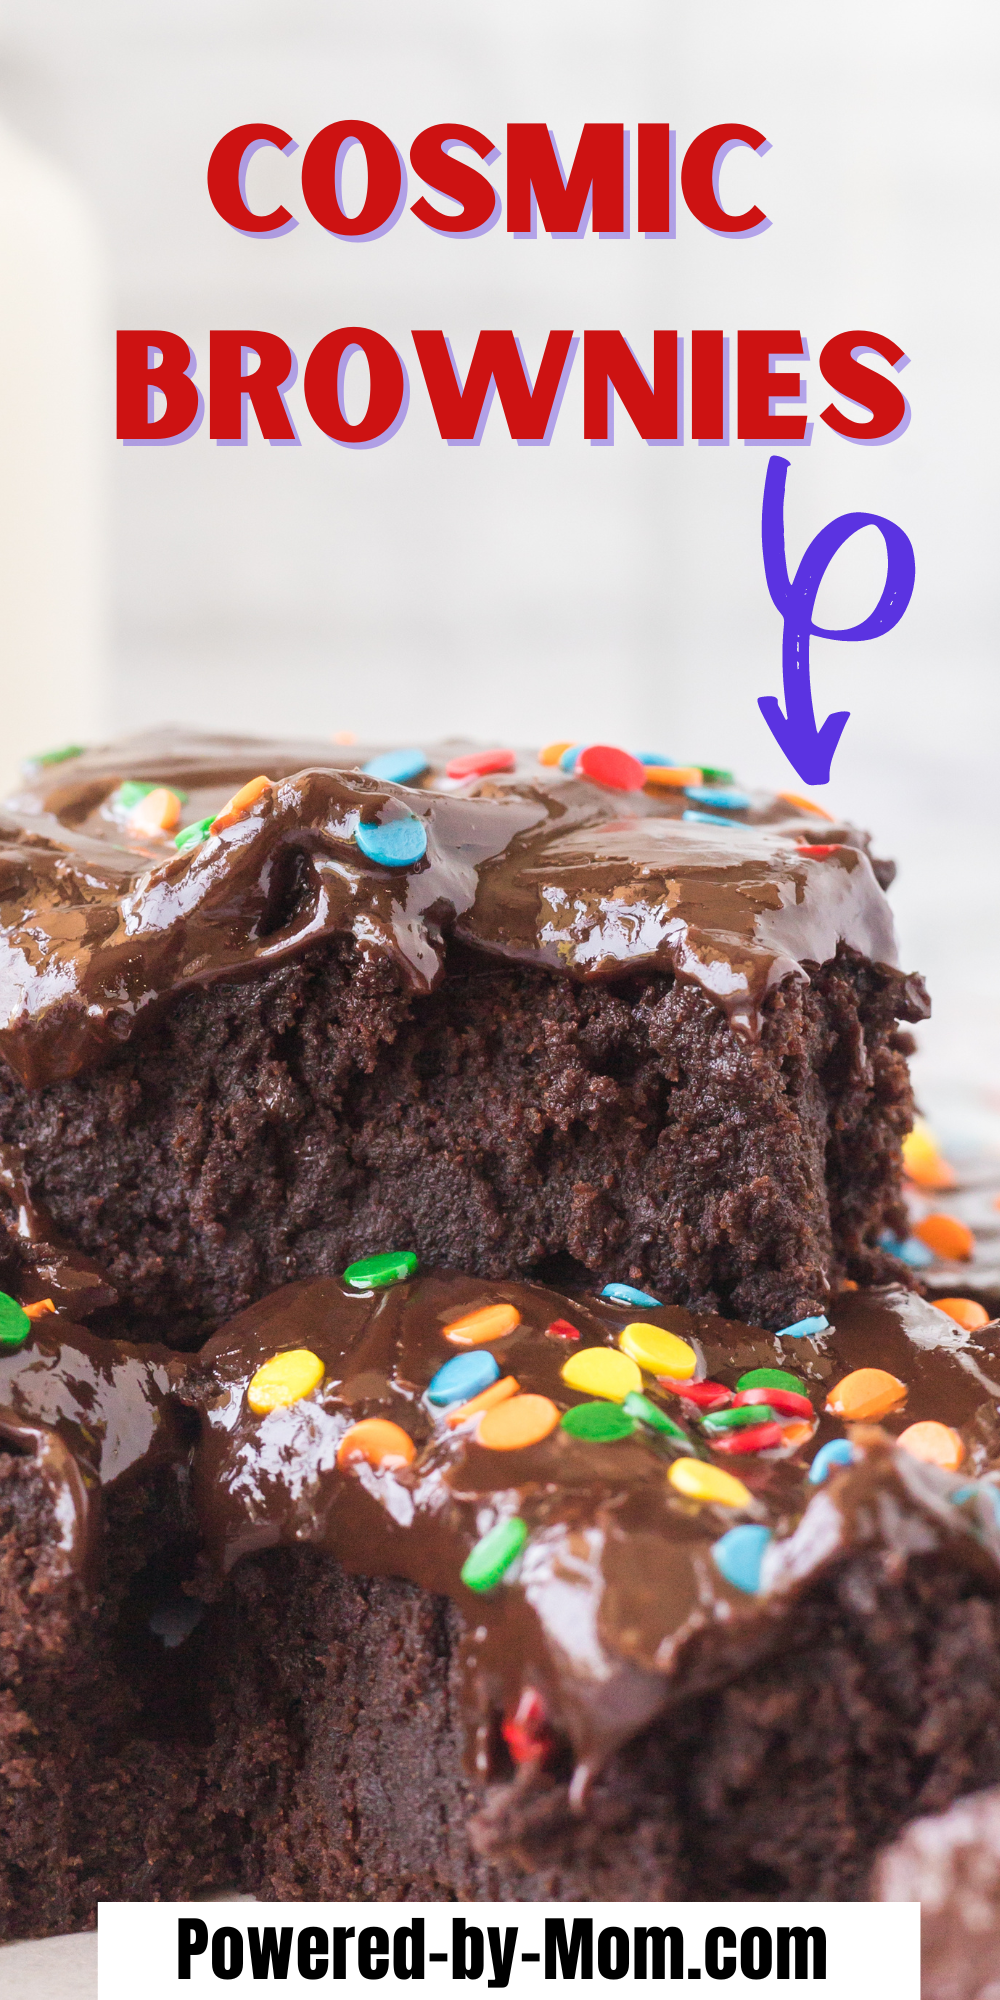 Copycat homemade Cosmic Brownie Recipe that gives you thick, ultra-rich fudgy, chewy brownies which taste better than store-bought. Get the recipe now.